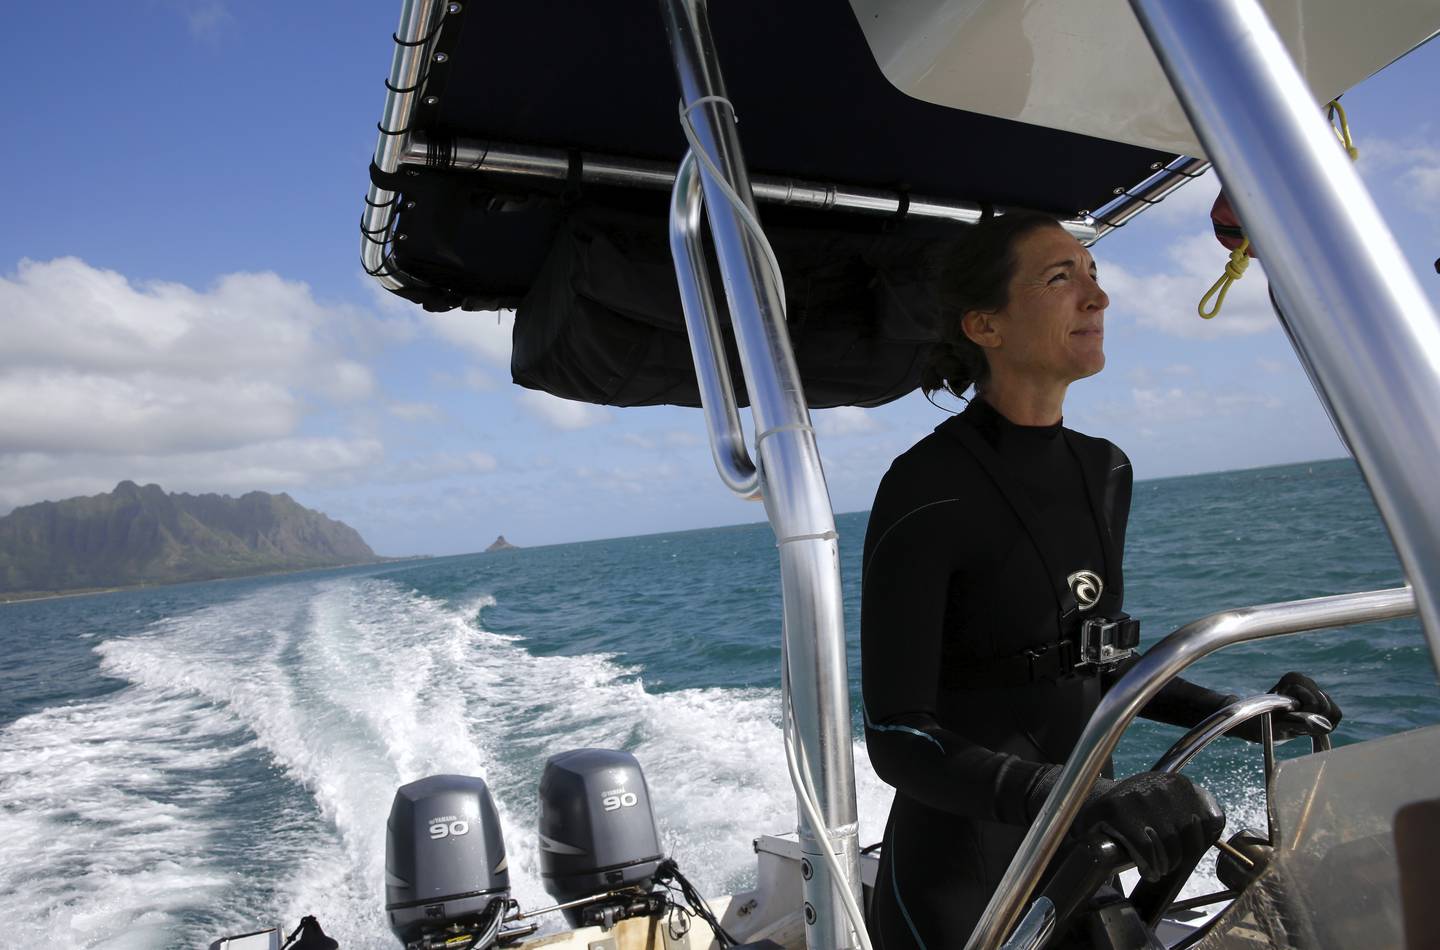 Kira Hughes, a coral researcher at the University of Hawaii's Institute of Marine Biology, drives a boat in Kaneohe Bay during a survey dive. Scientists are trying to speed up coral's evolutionary clock to build reefs that can better withstand the impacts of global warming. AP